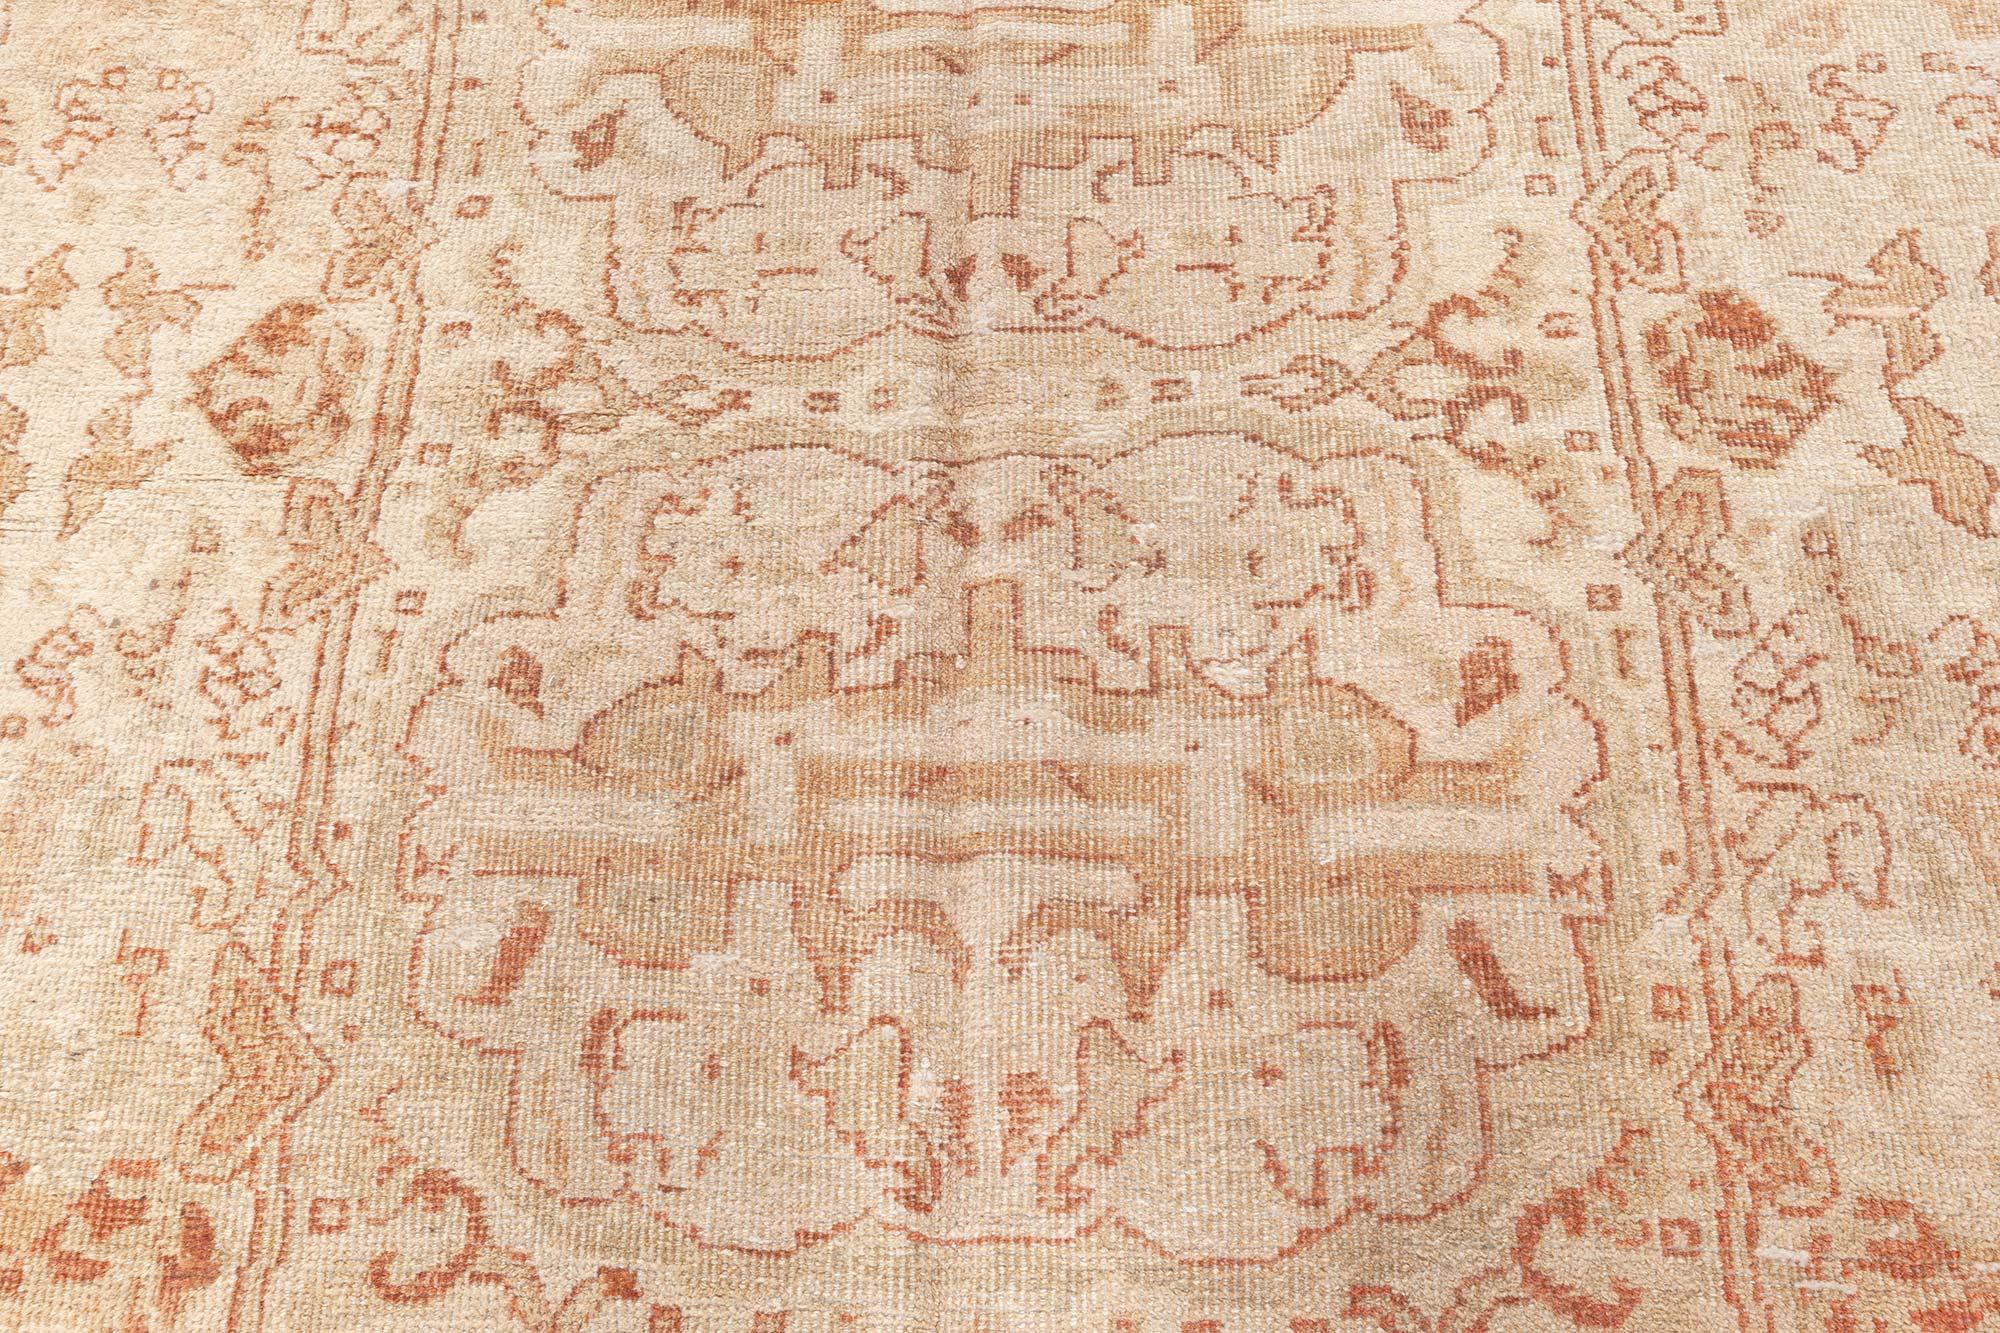 Authentic Indian Amritsar beige, brown handmade wool rug
Size: 6'7